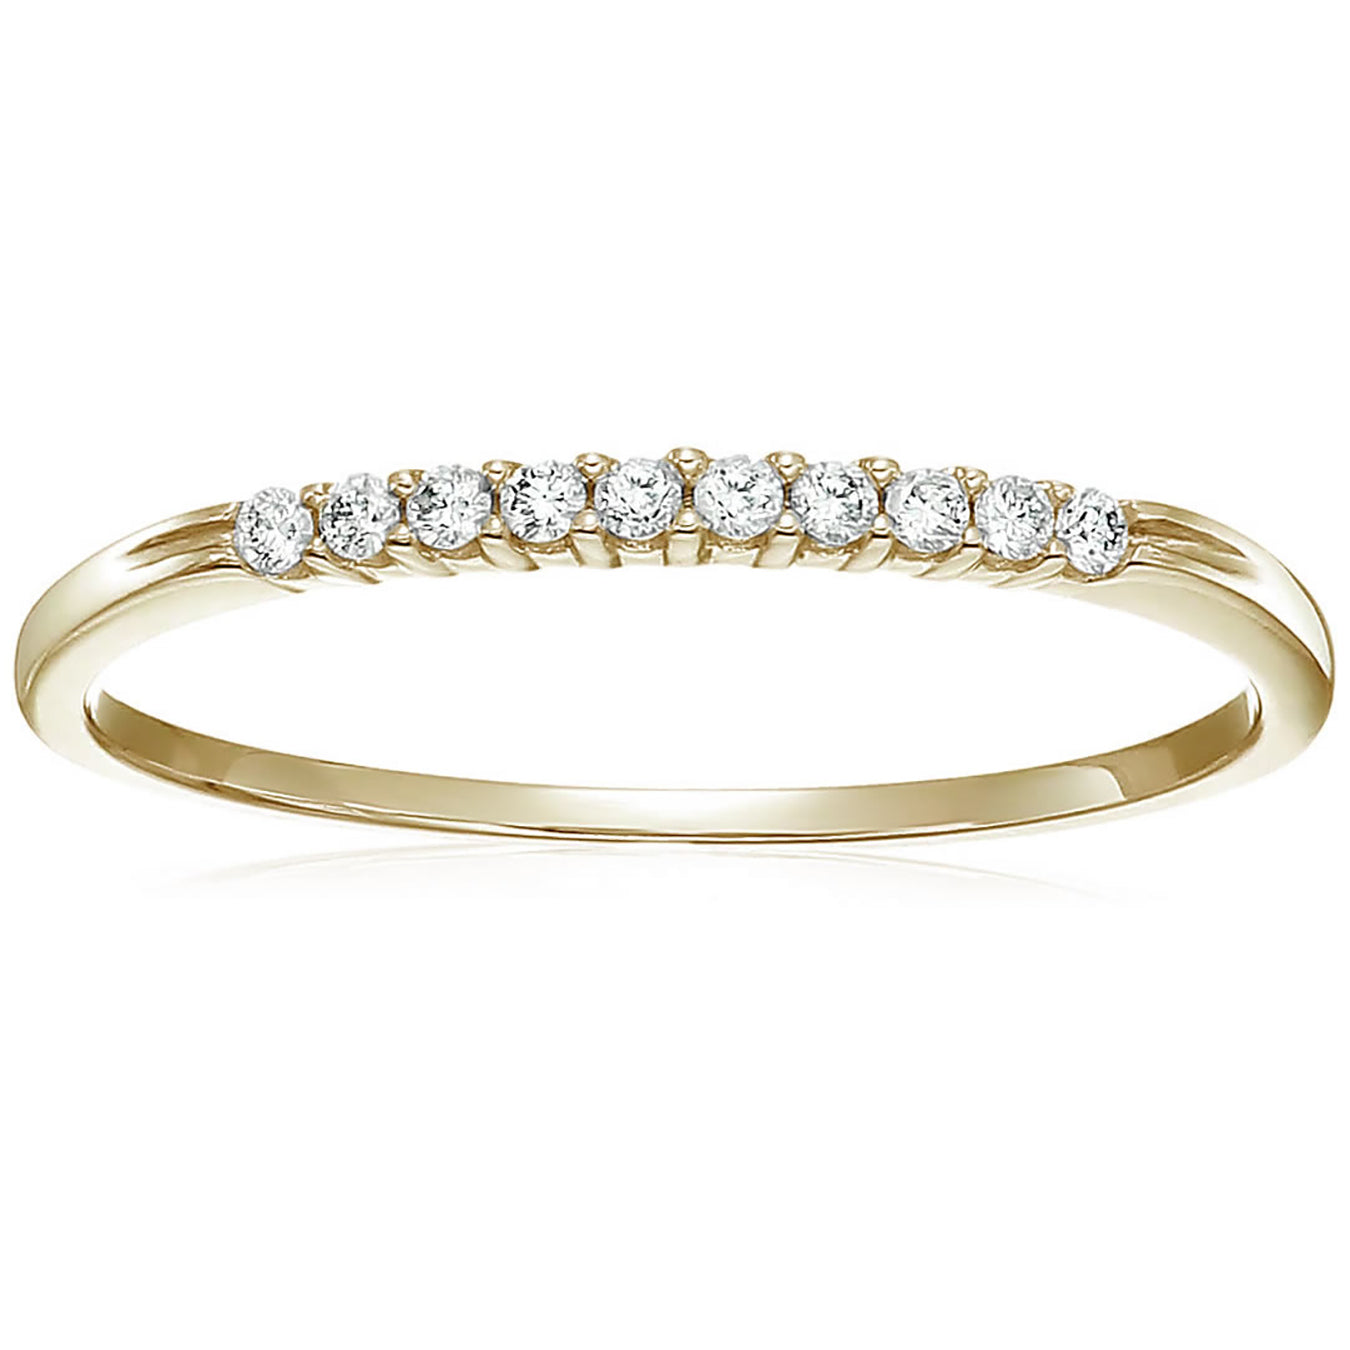 1/10 cttw Petite Diamond Wedding Band for Women in 10K Yellow Gold Prong Set, Size 4.5-10